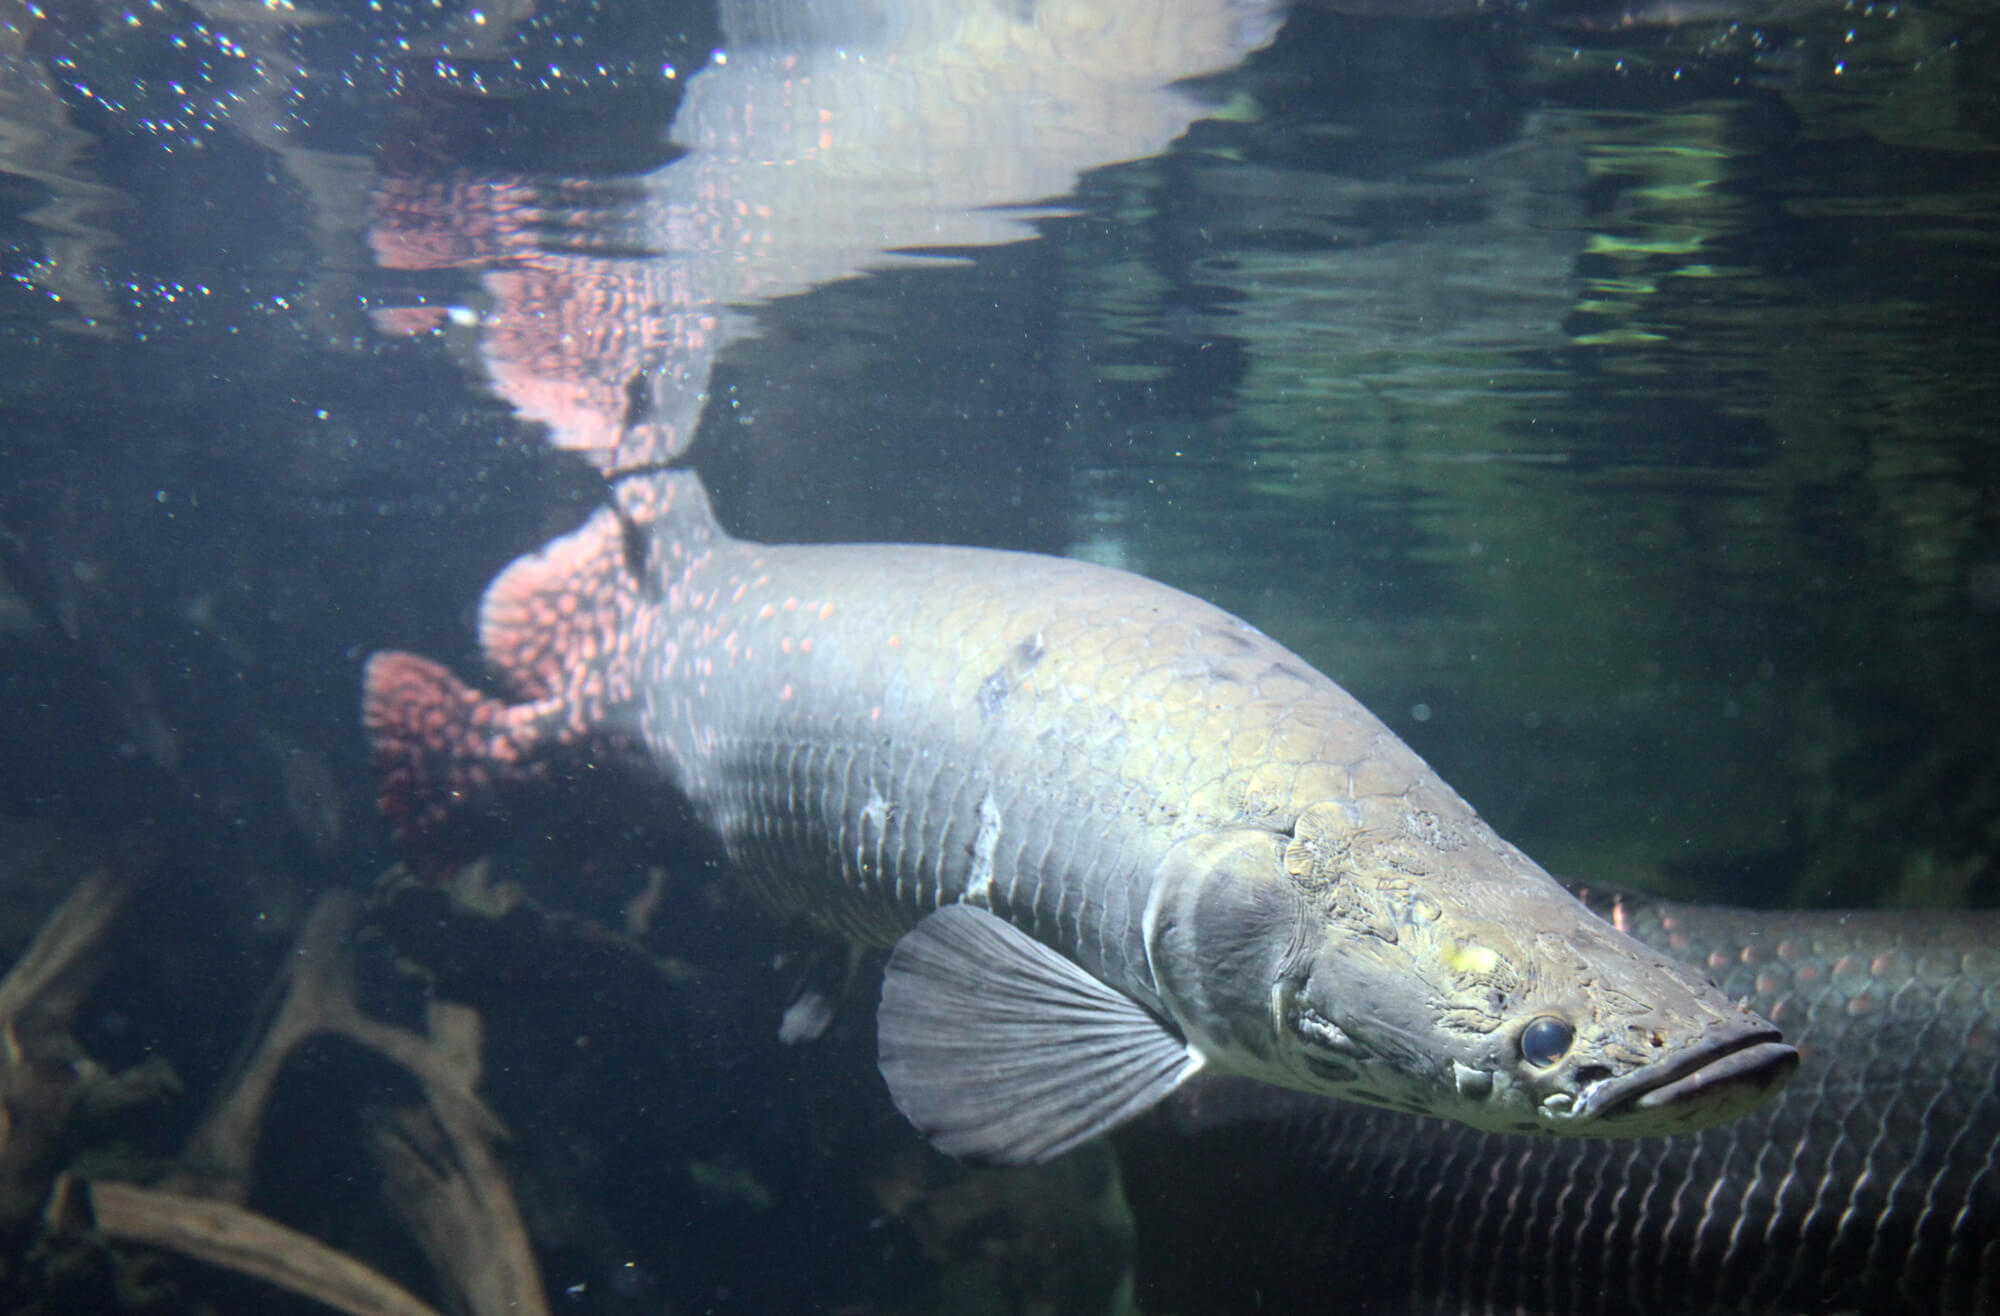 A real Amazon river monster - the Arapaima